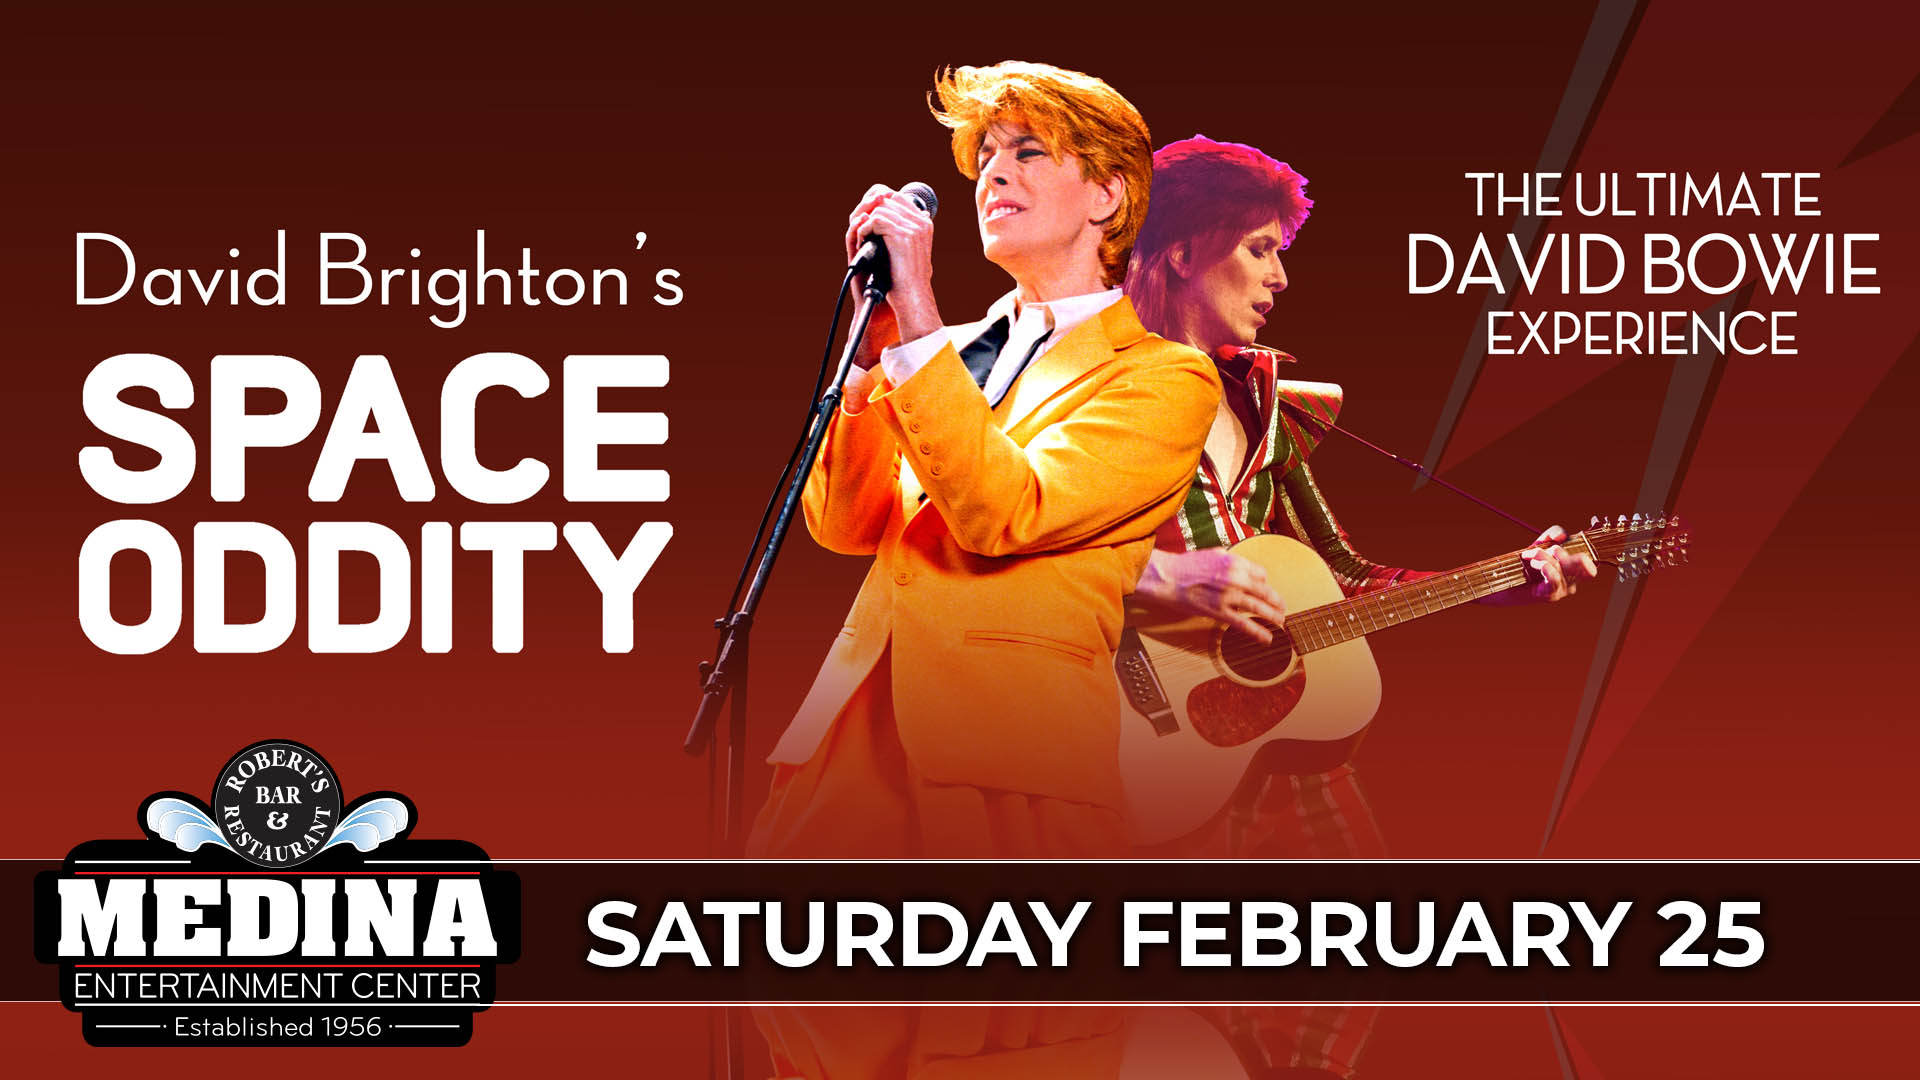 David Brighton's SPACE ODDITY The Quintessential David Bowie Experience Medina Entertainment Center Saturday, February 25, 2023 Doors: 7:00 PM | Music: 8:00 PM | 21+ Tickets on-sale Friday, November 4 at 11am Ticket Prices: $40.00 (Gold Seating), $35.00 (Silver Seating) & $30.00 (GA Seating) plus applicable fees